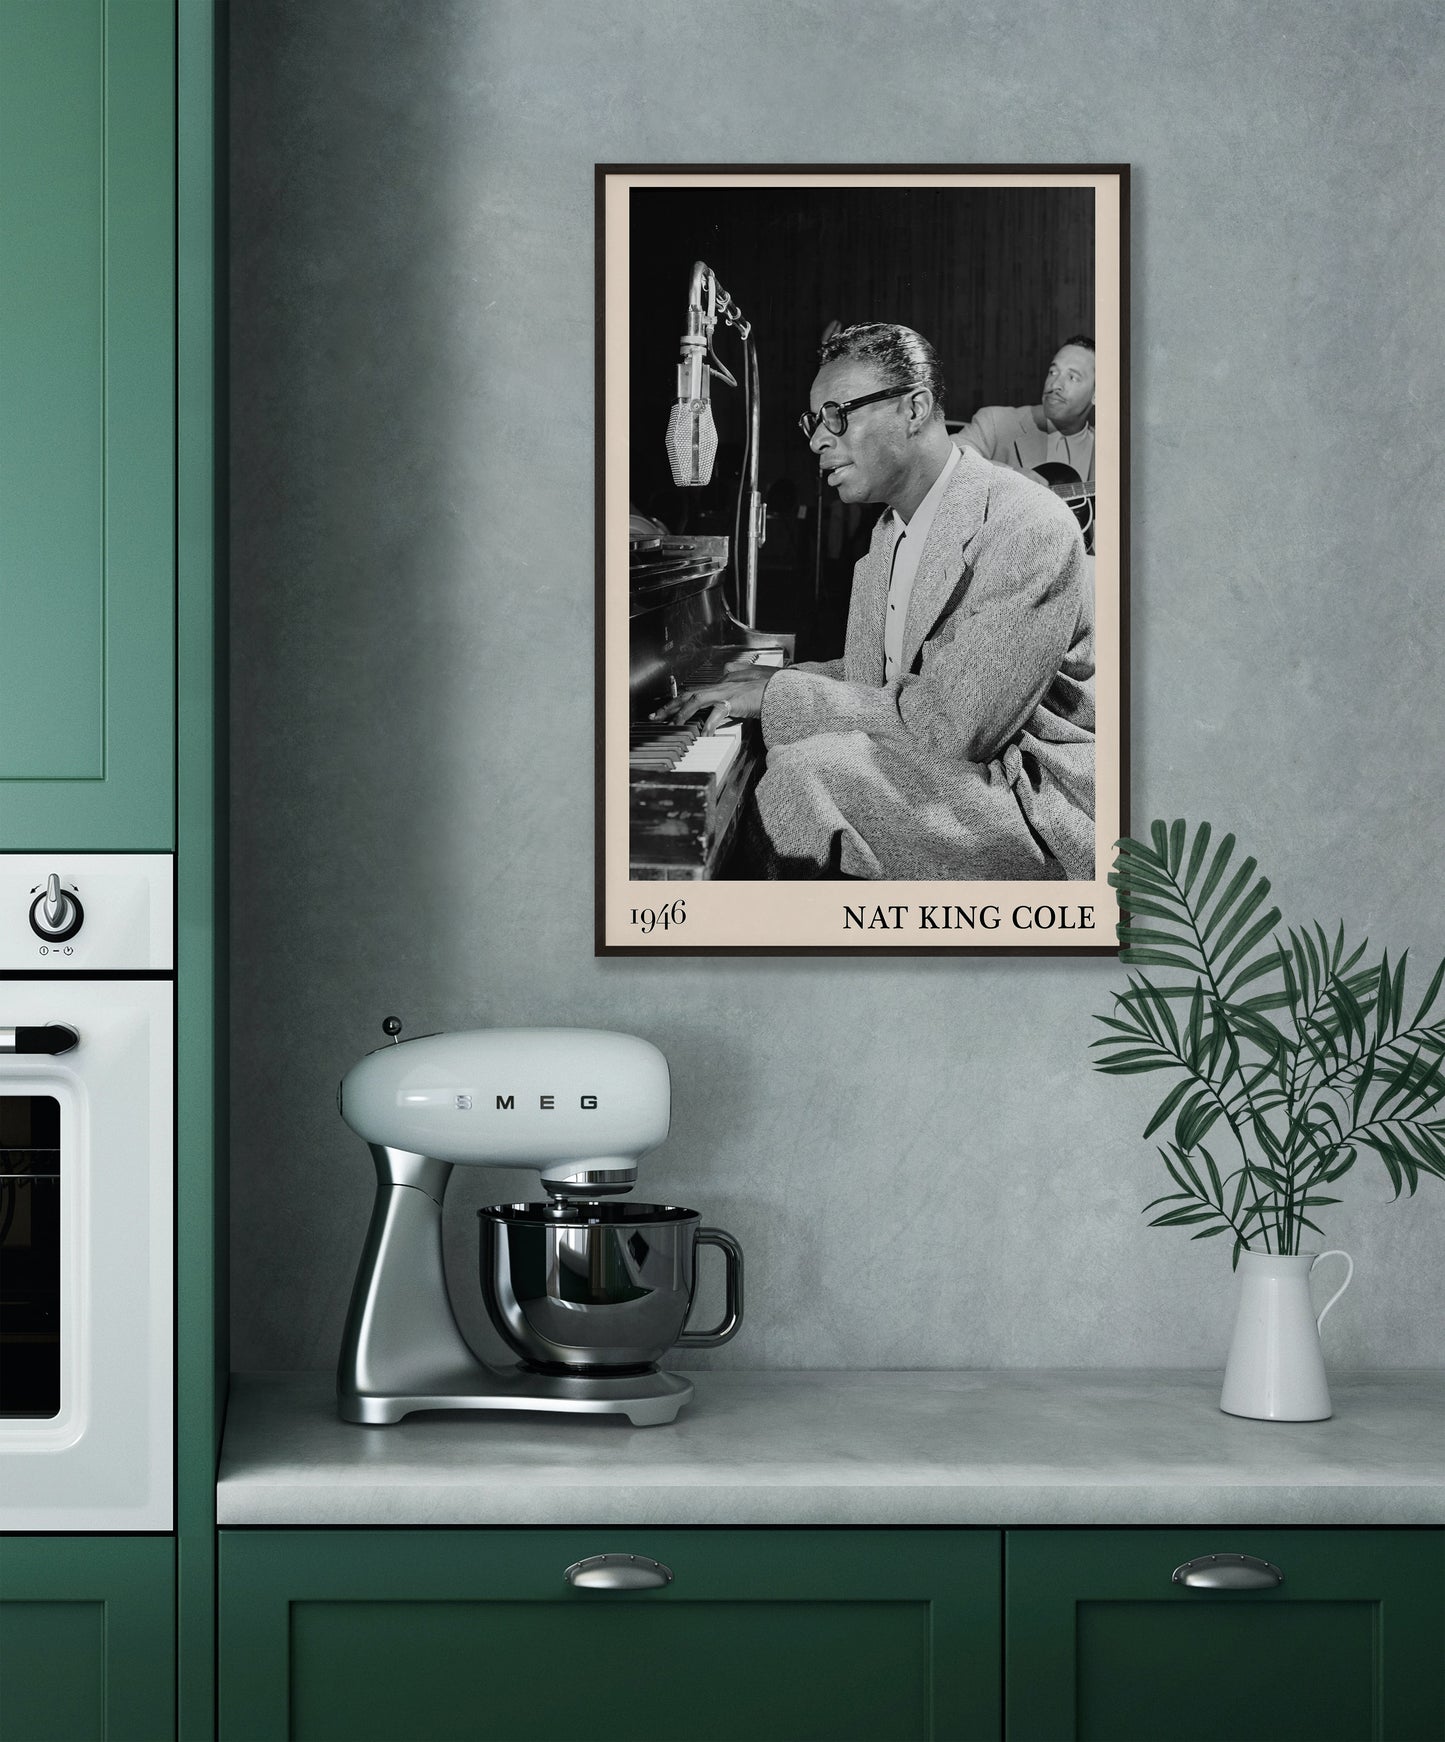 1946 picture of Nat King Cole playing a piano and singing. Picture crafted into a cool black framed music poster, with an off-white border. Poster is hanging on a grey kitchen wall